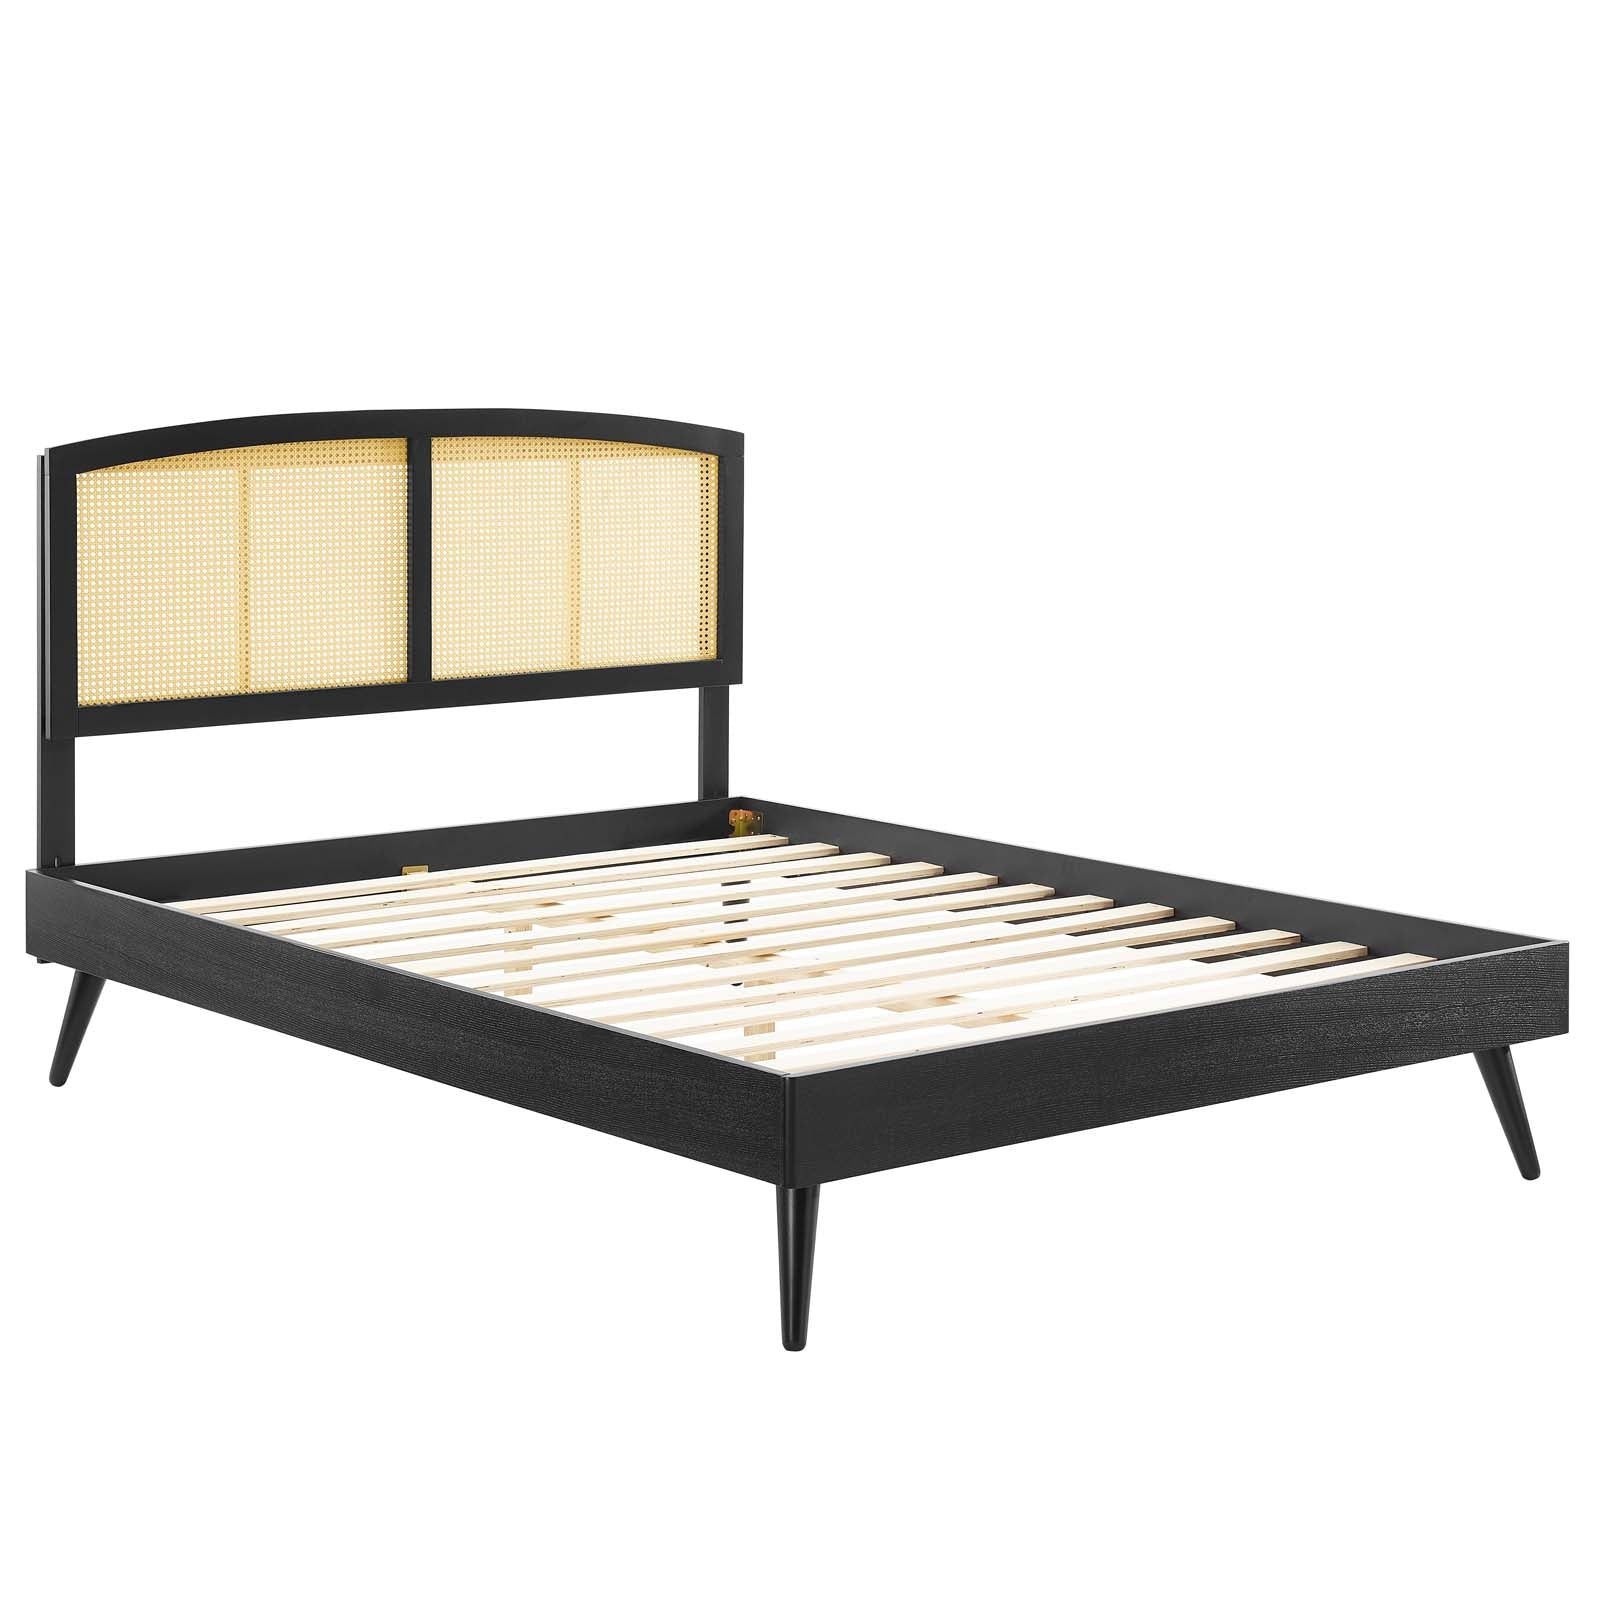 Sierra Cane and Wood King Platform Bed With Splayed Legs